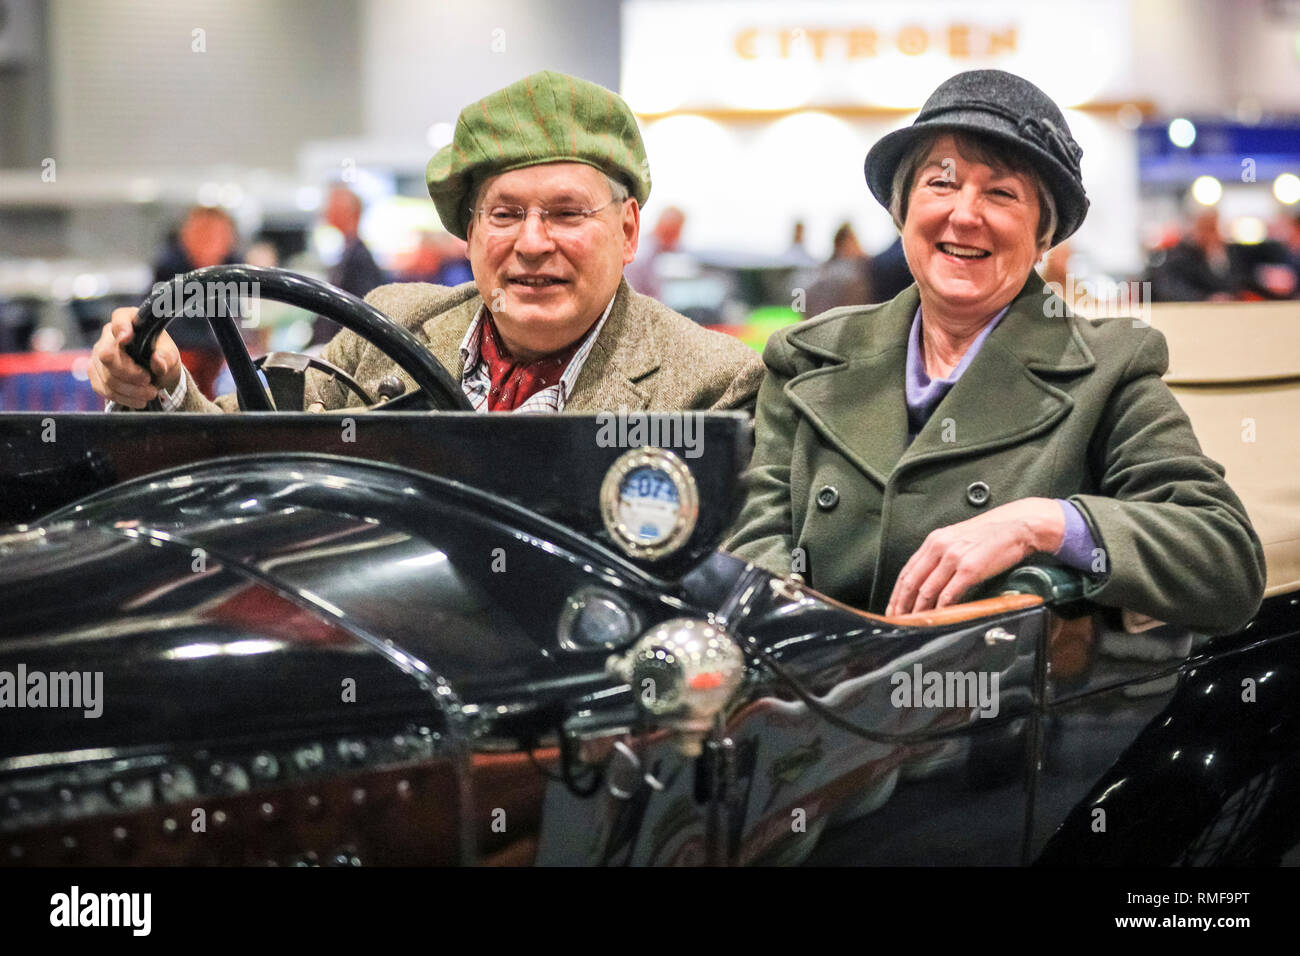 ExCel, London, UK, 14th Feb 2019.The owners of a vintage car seem delighted to race down the 'Grand Avenue' race track. The London Classic Car Show 2019 opens at ExCel Exhibition Centre in London Docklands. The show  brings together classic car owners, collectors, experts and enthusiast with dealers, manufacturers and car clubs in a celebration of motoring and classic cars. Credit: Imageplotter News and Sports/Alamy Live News Stock Photo